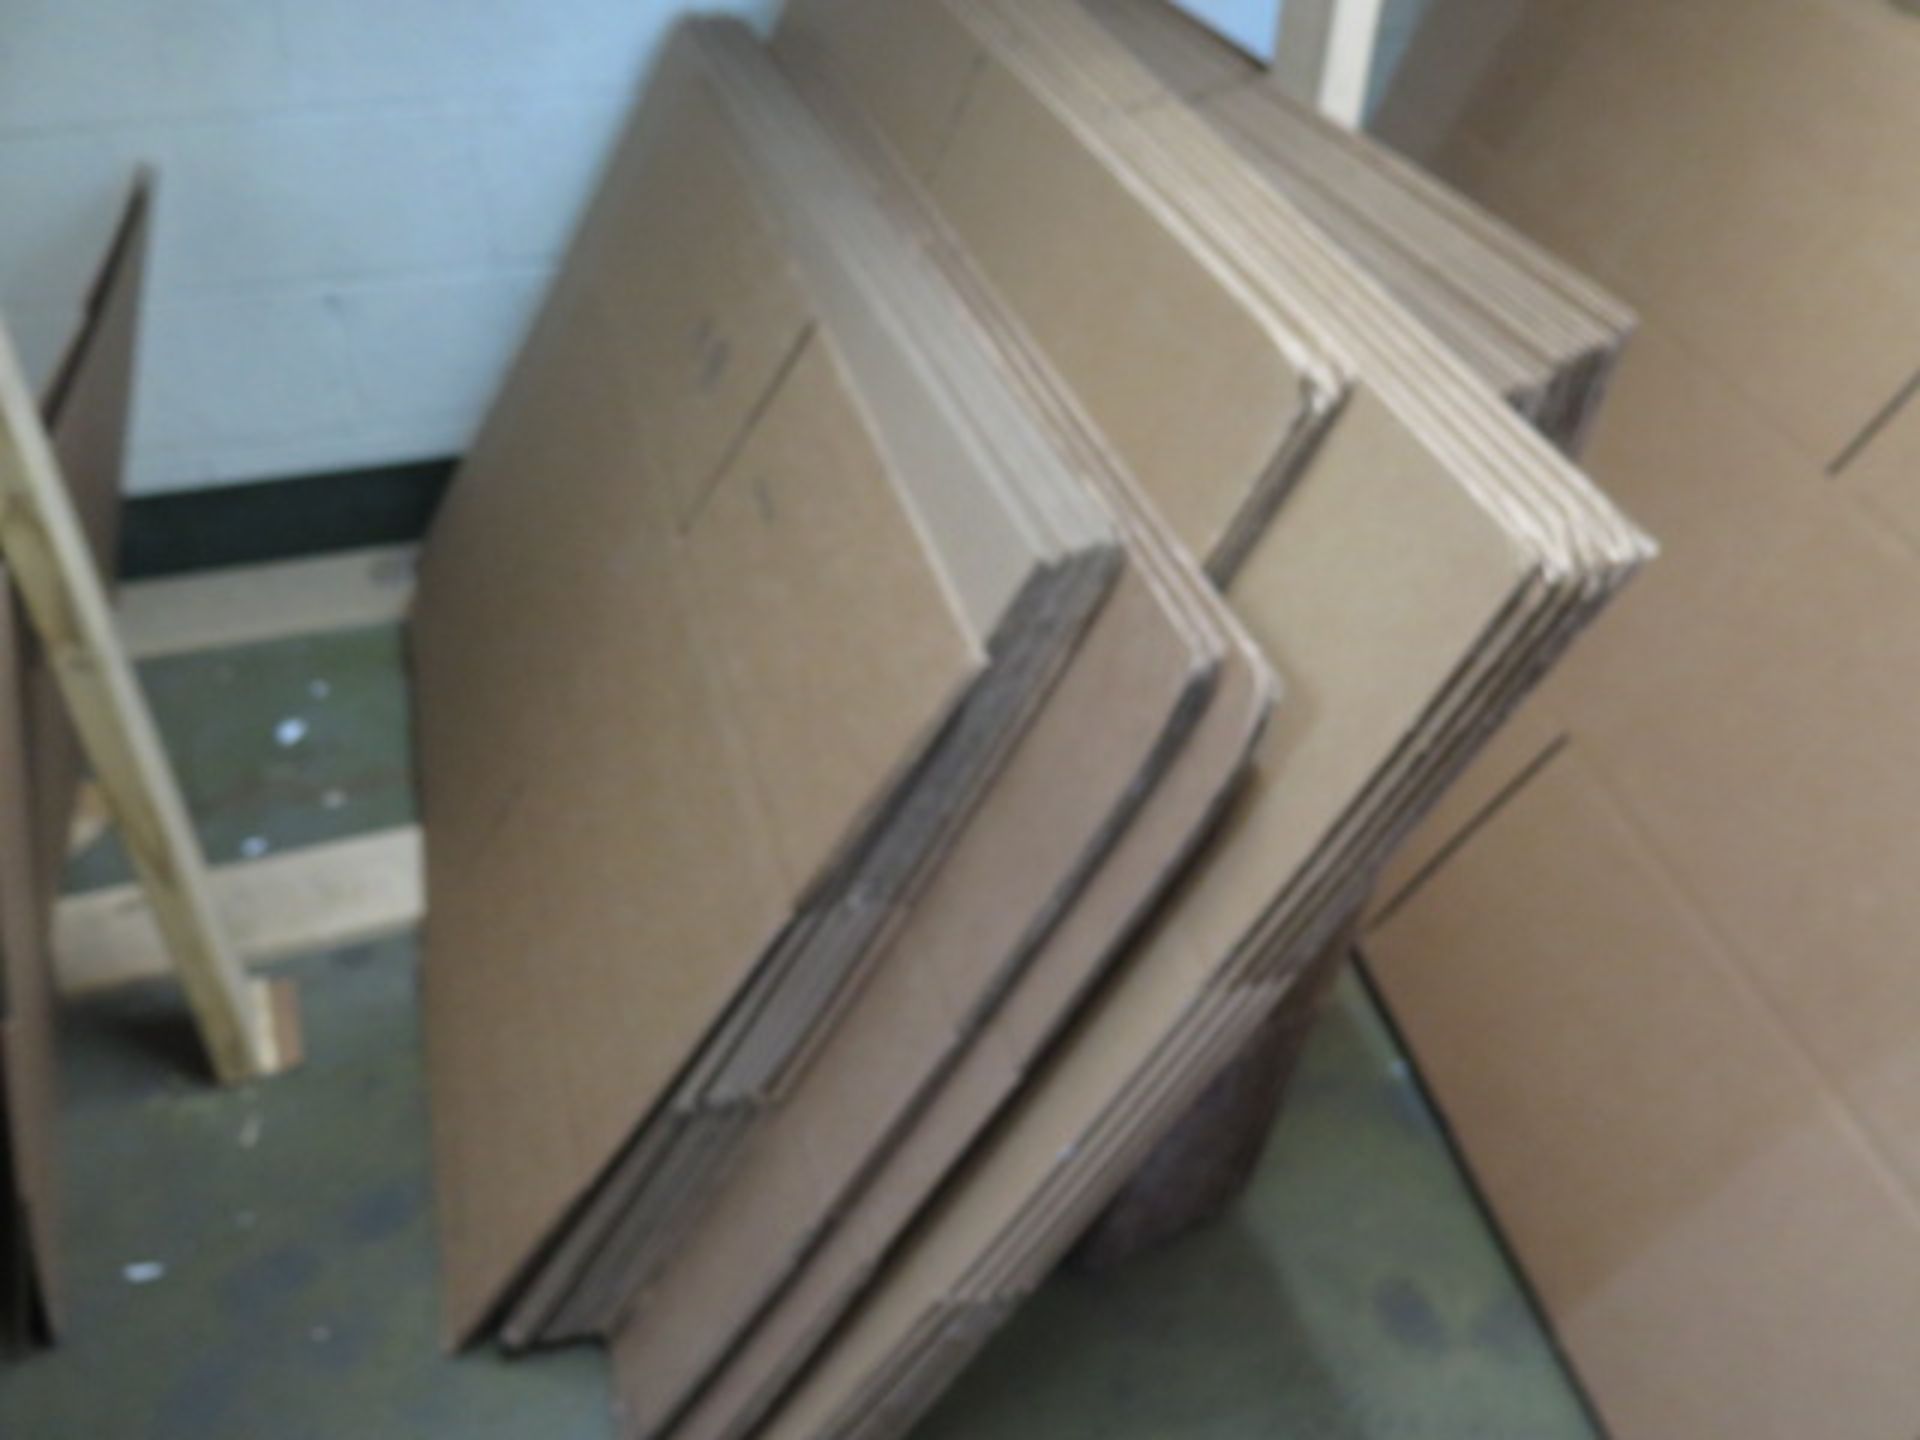 Shipping Boxes and Shelf (SOLD AS-IS - NO WARRANTY) - Image 2 of 8